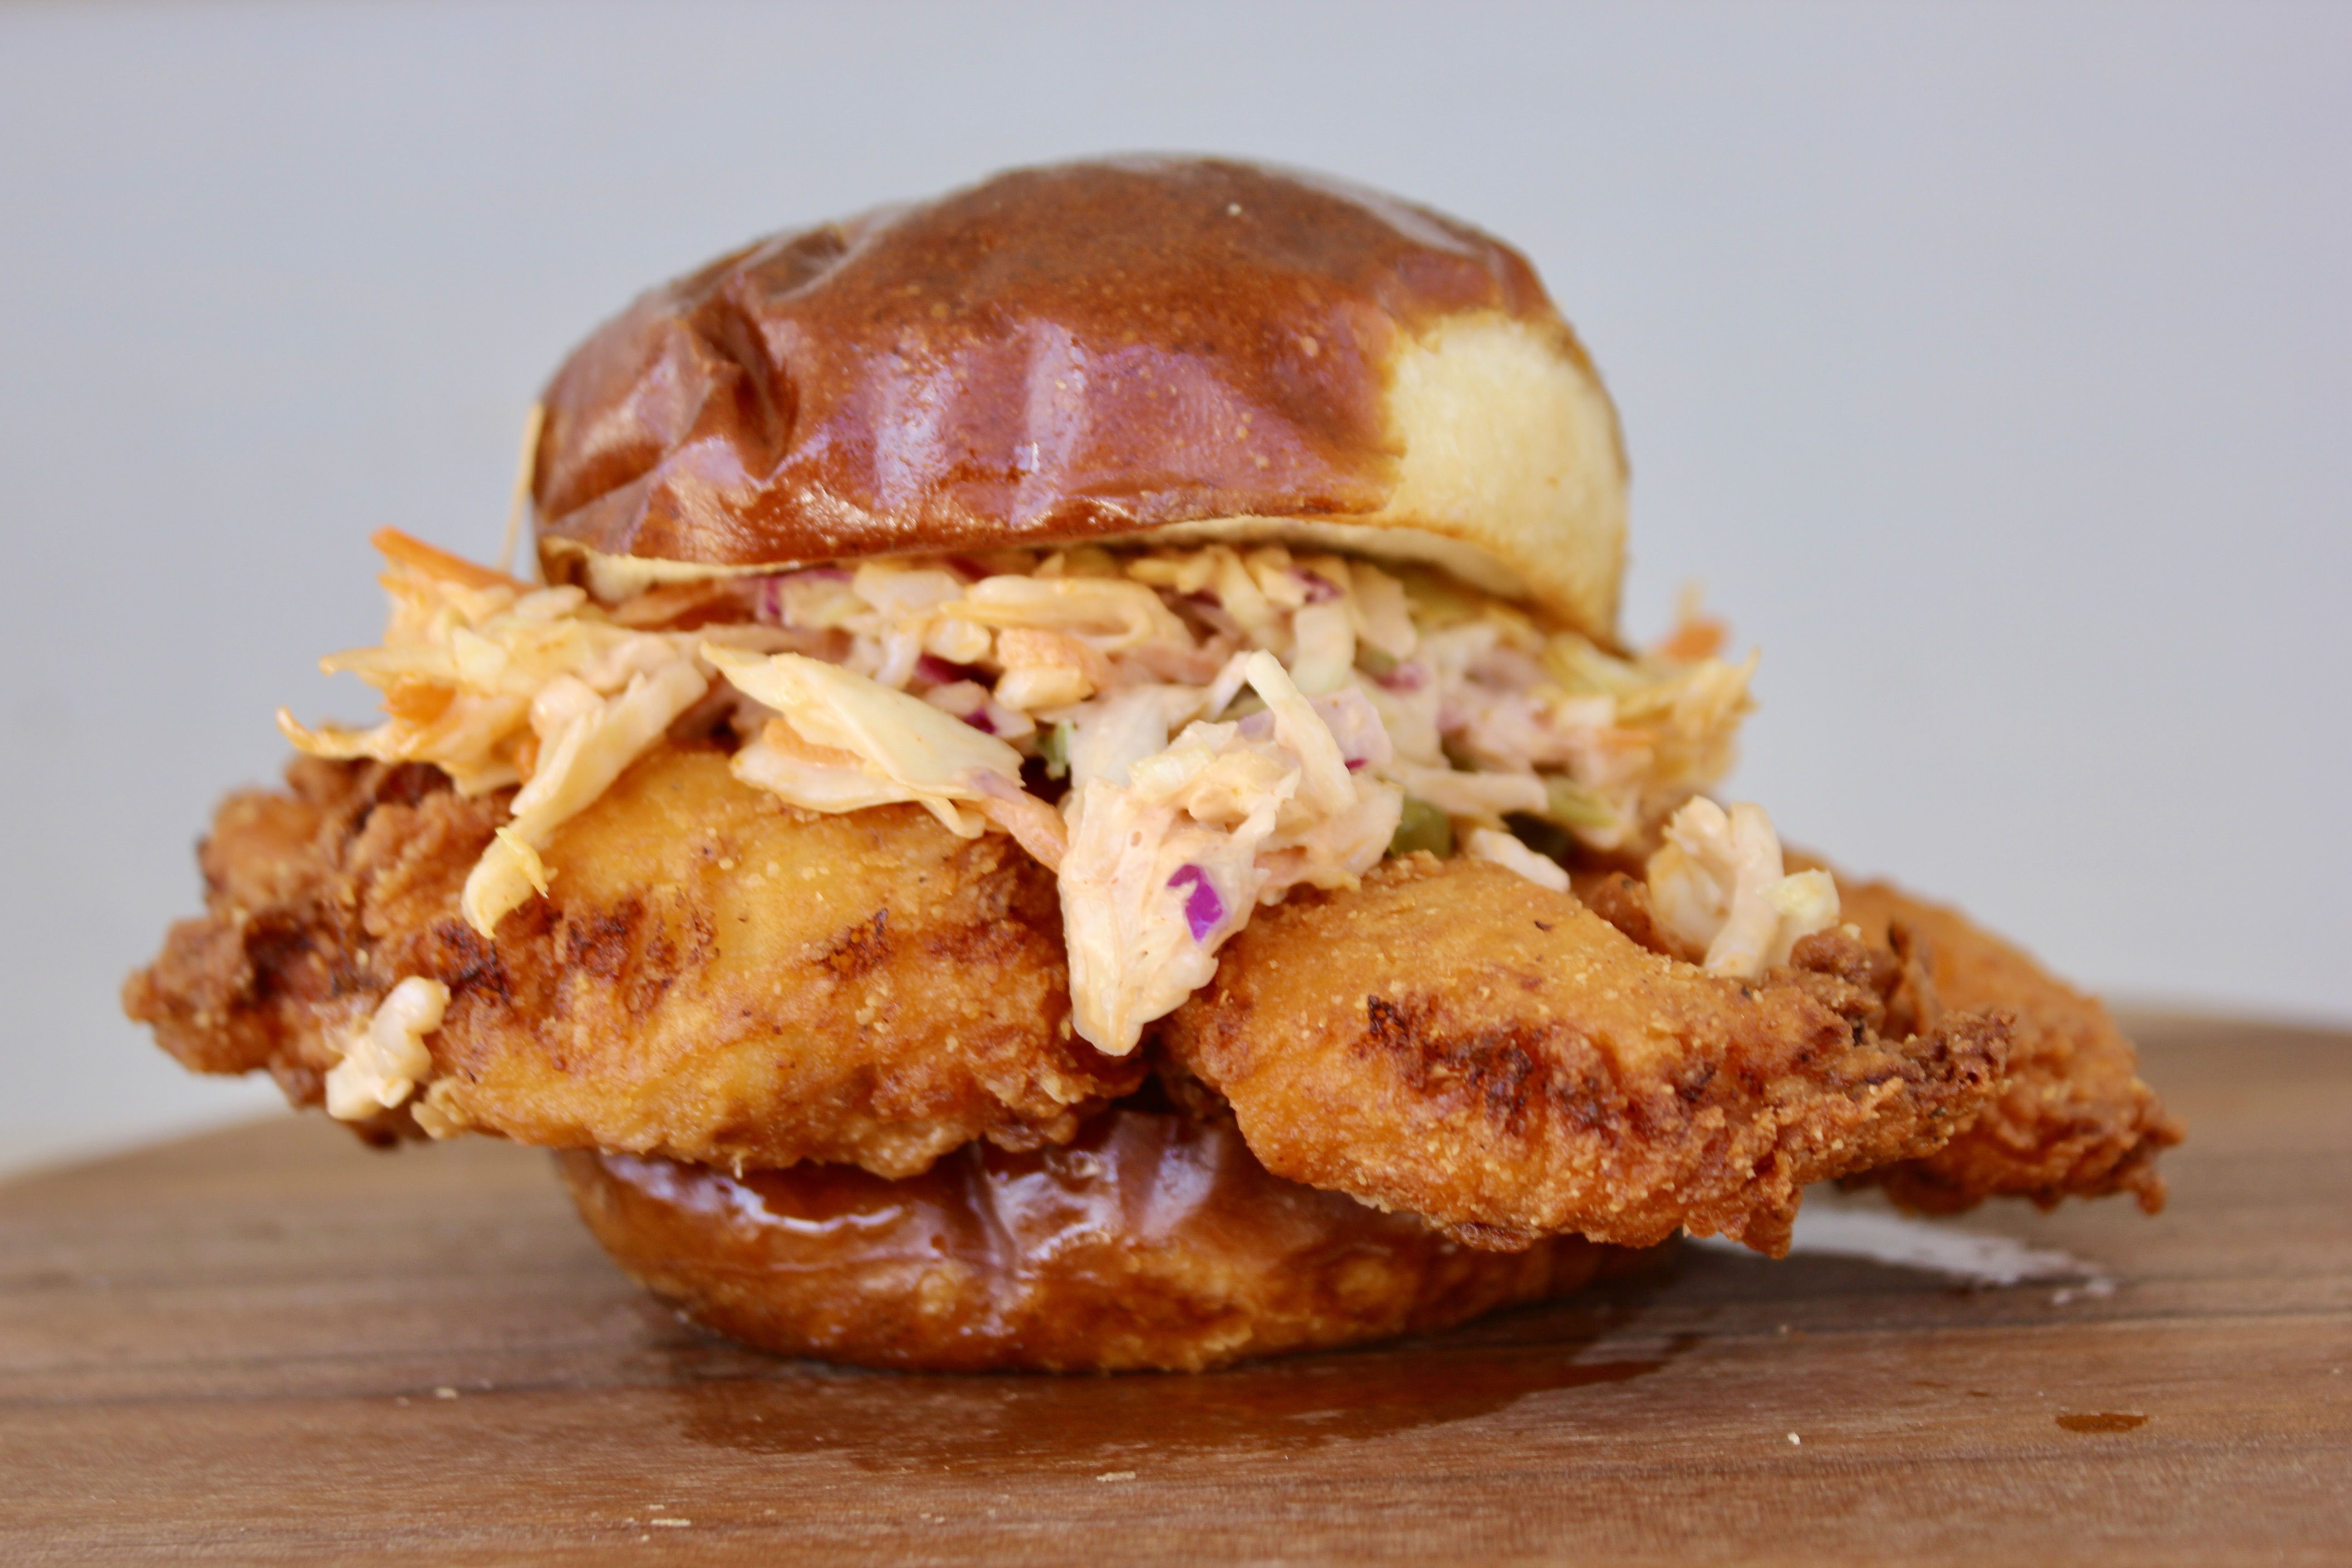 The Nashville Fried Chicken Sandwich from Exile in Des Moines.